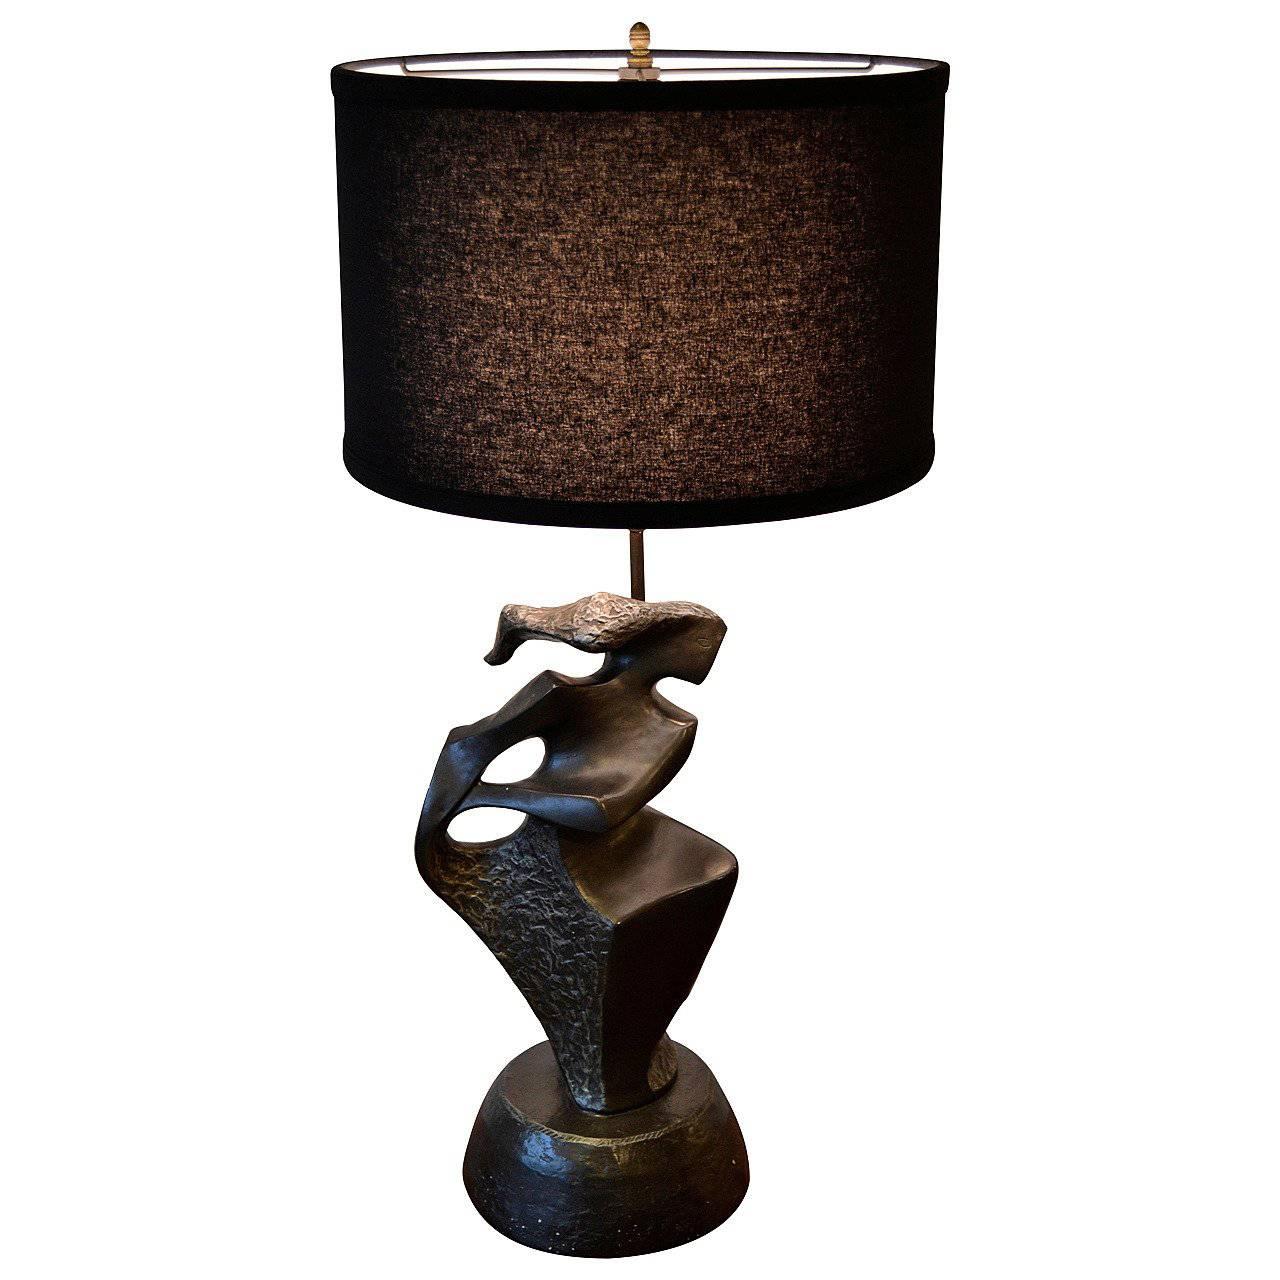 Frederic Weinberg Female Sculptural Table Lamp, circa 1950s